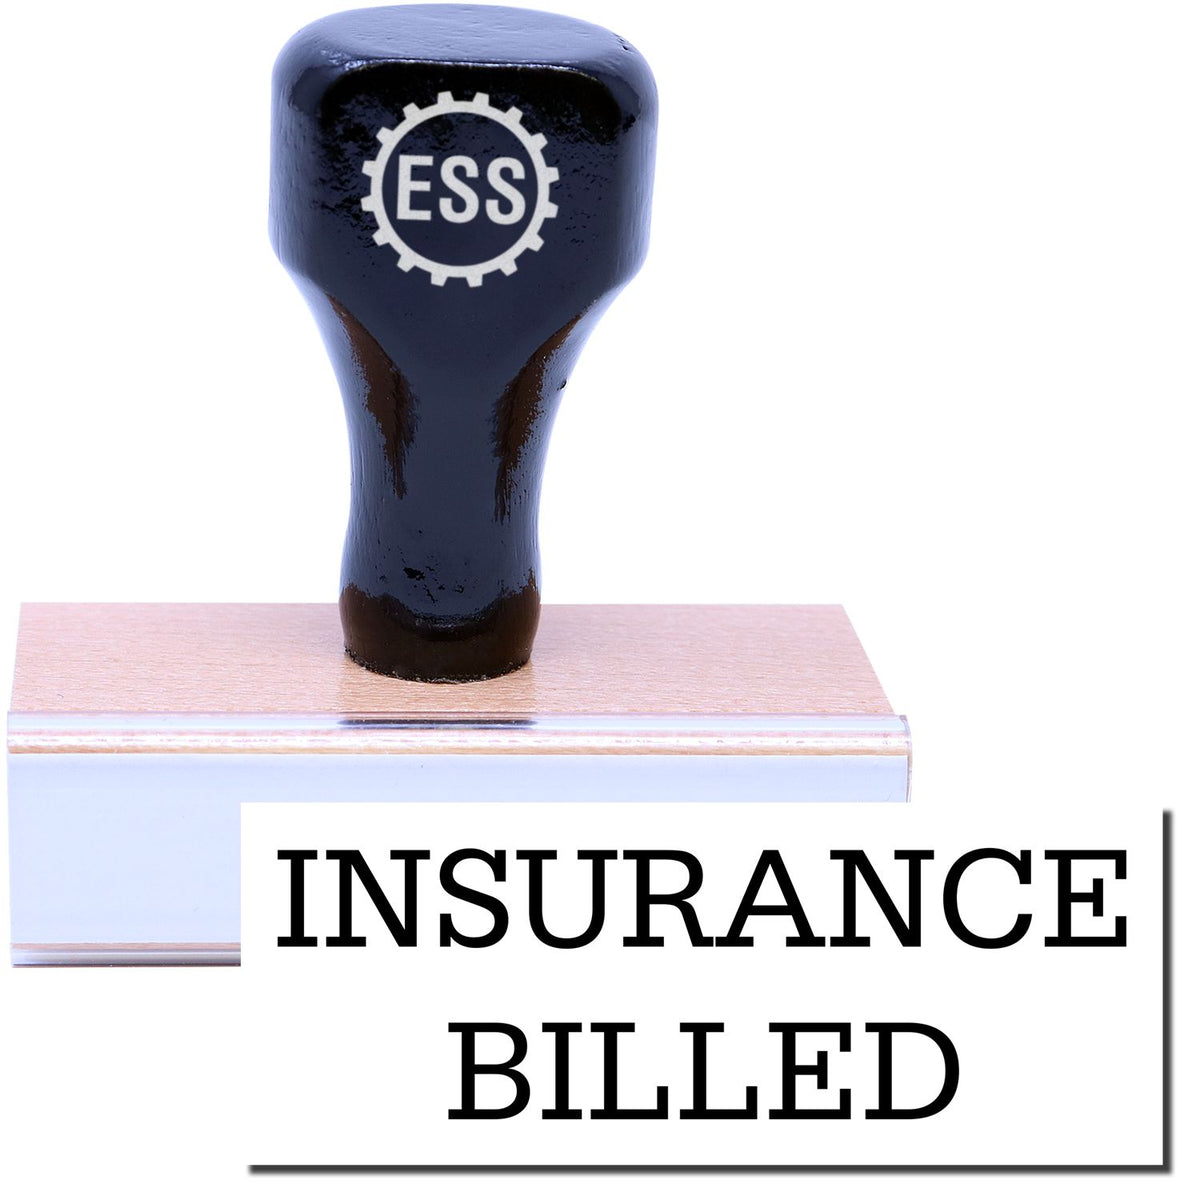 A stock office rubber stamp with a stamped image showing how the text &quot;INSURANCE BILLED&quot; is displayed after stamping.